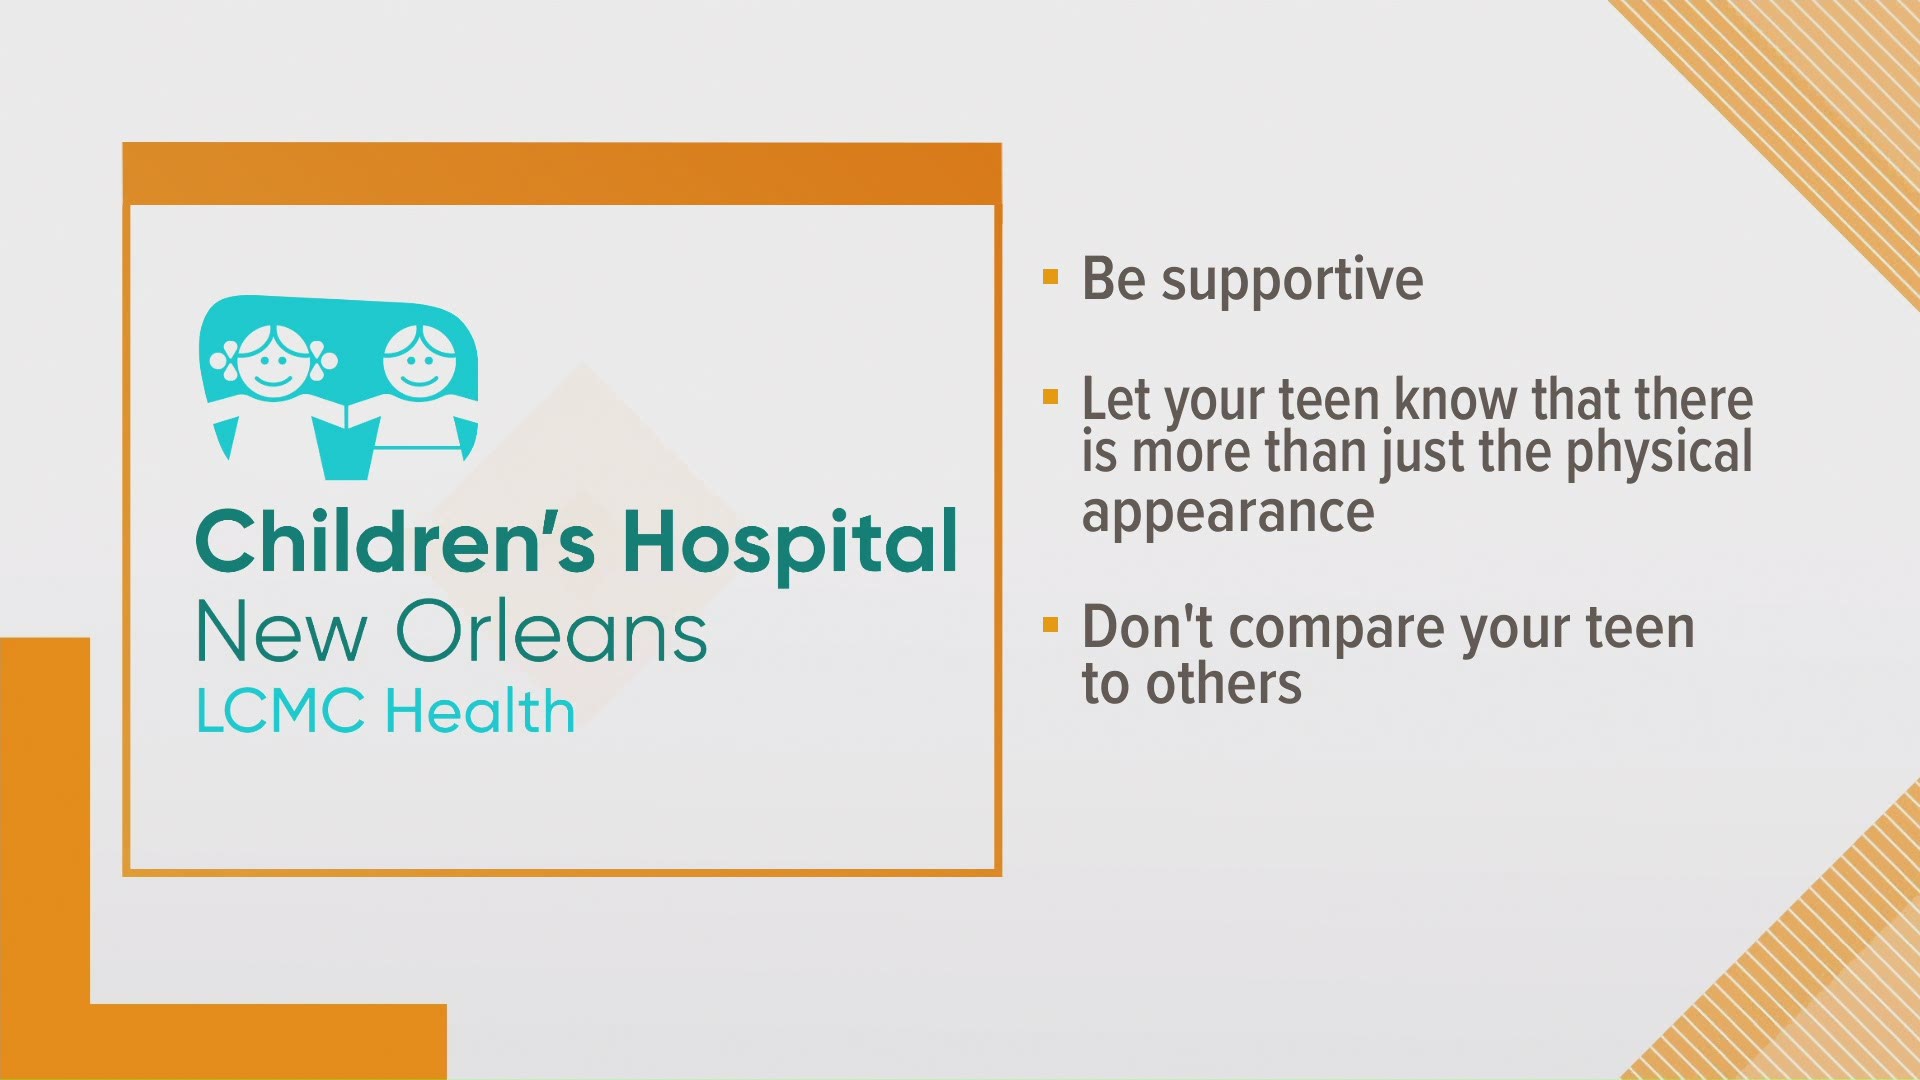 The Parenting Center gives advice to help parents best support their child as they develop their own identity.